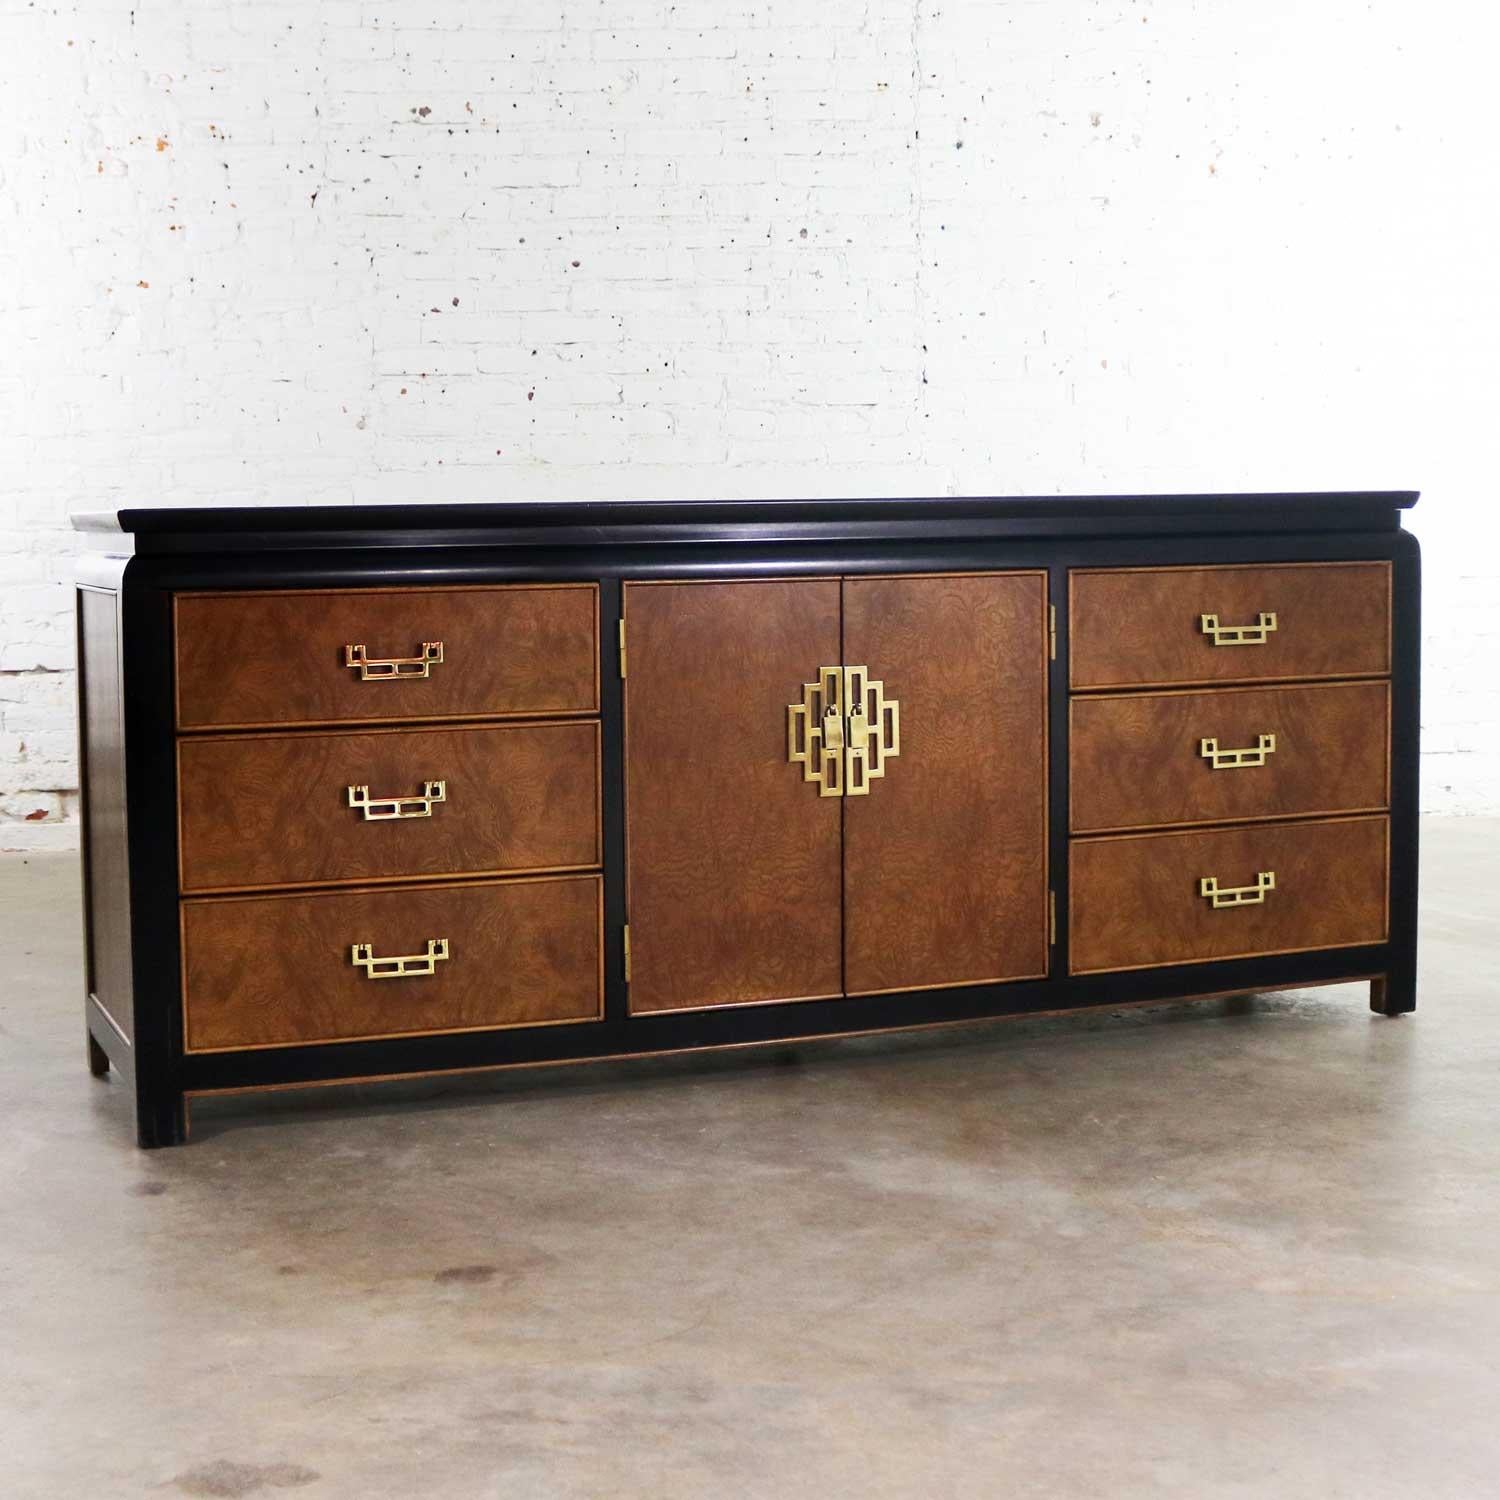 Handsome Hollywood Regency chinoiserie low dresser or console cabinet designed by Raymond K. Sobota for his Chin Hua Collection for Century Furniture. It is in wonderful vintage condition overall. It does have normal signs of age but nothing